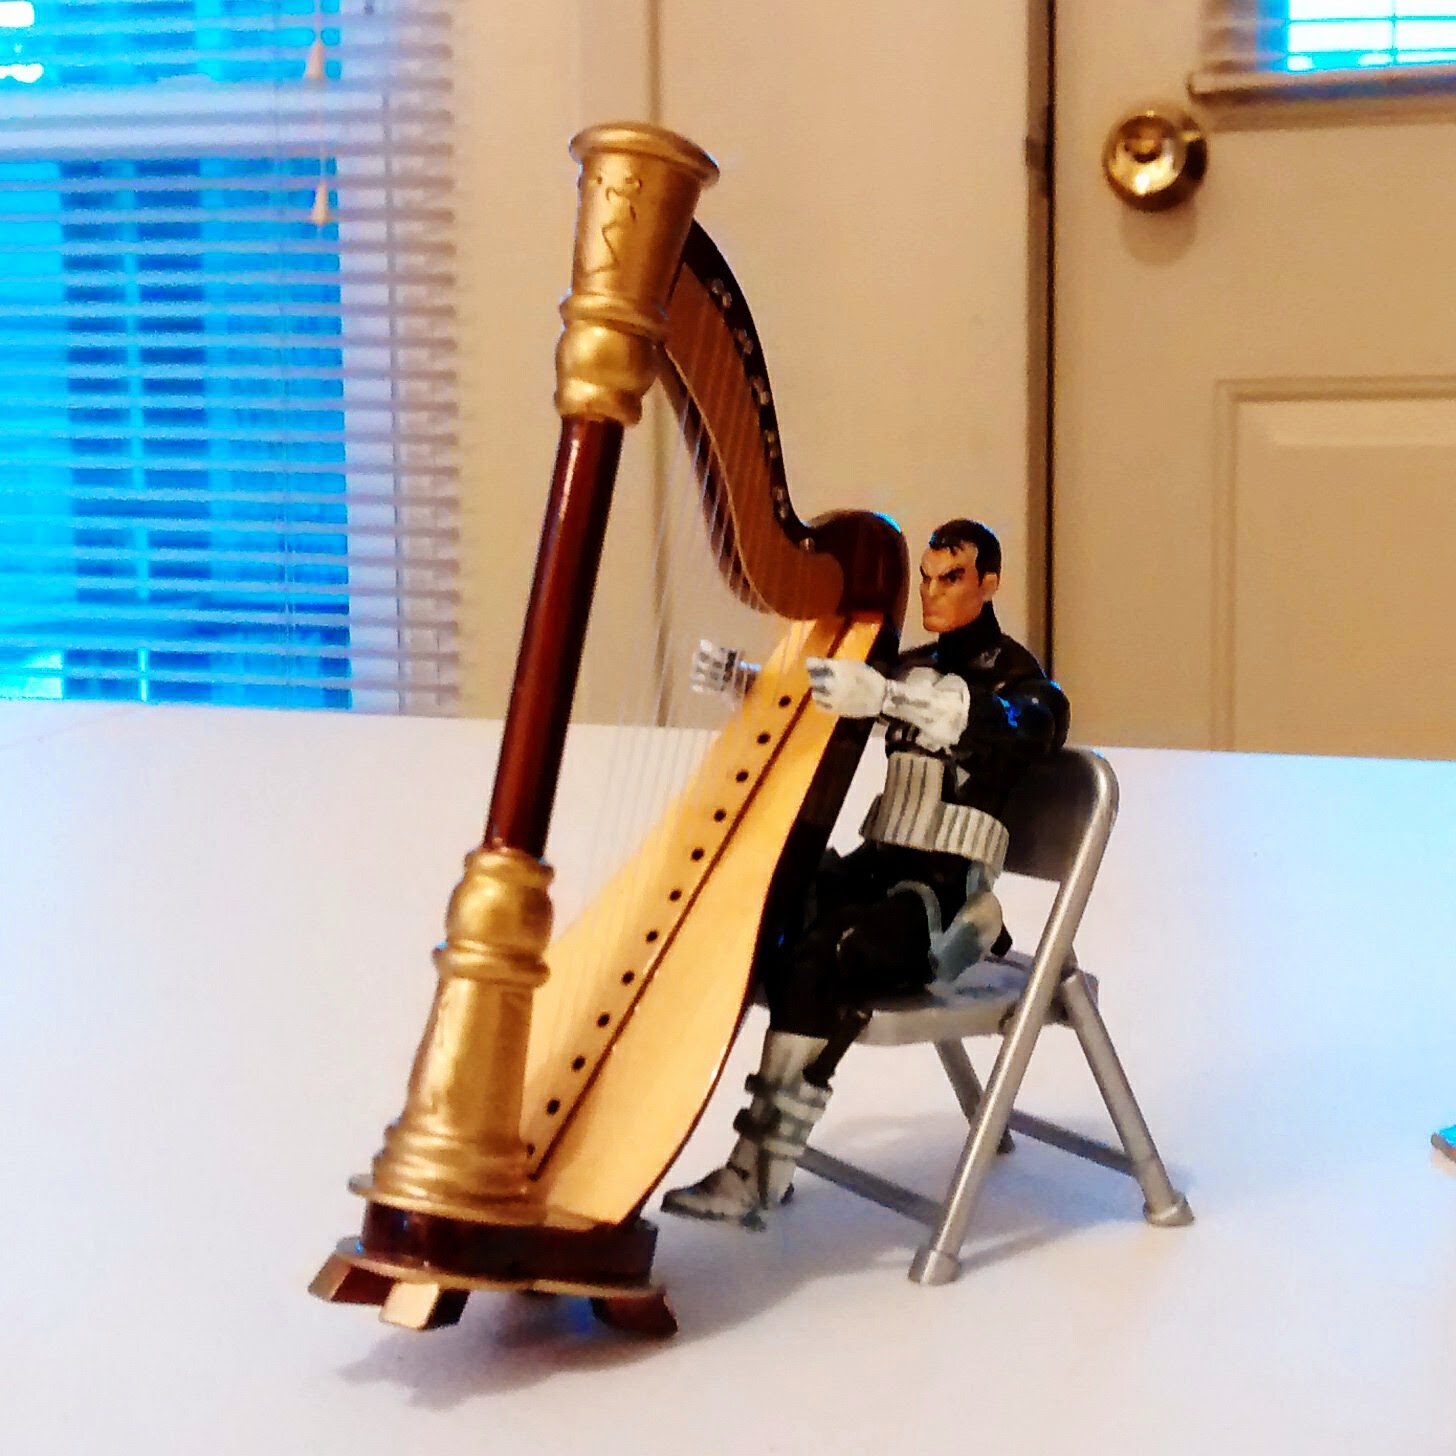 The Punisher can sit and play his harp after all!